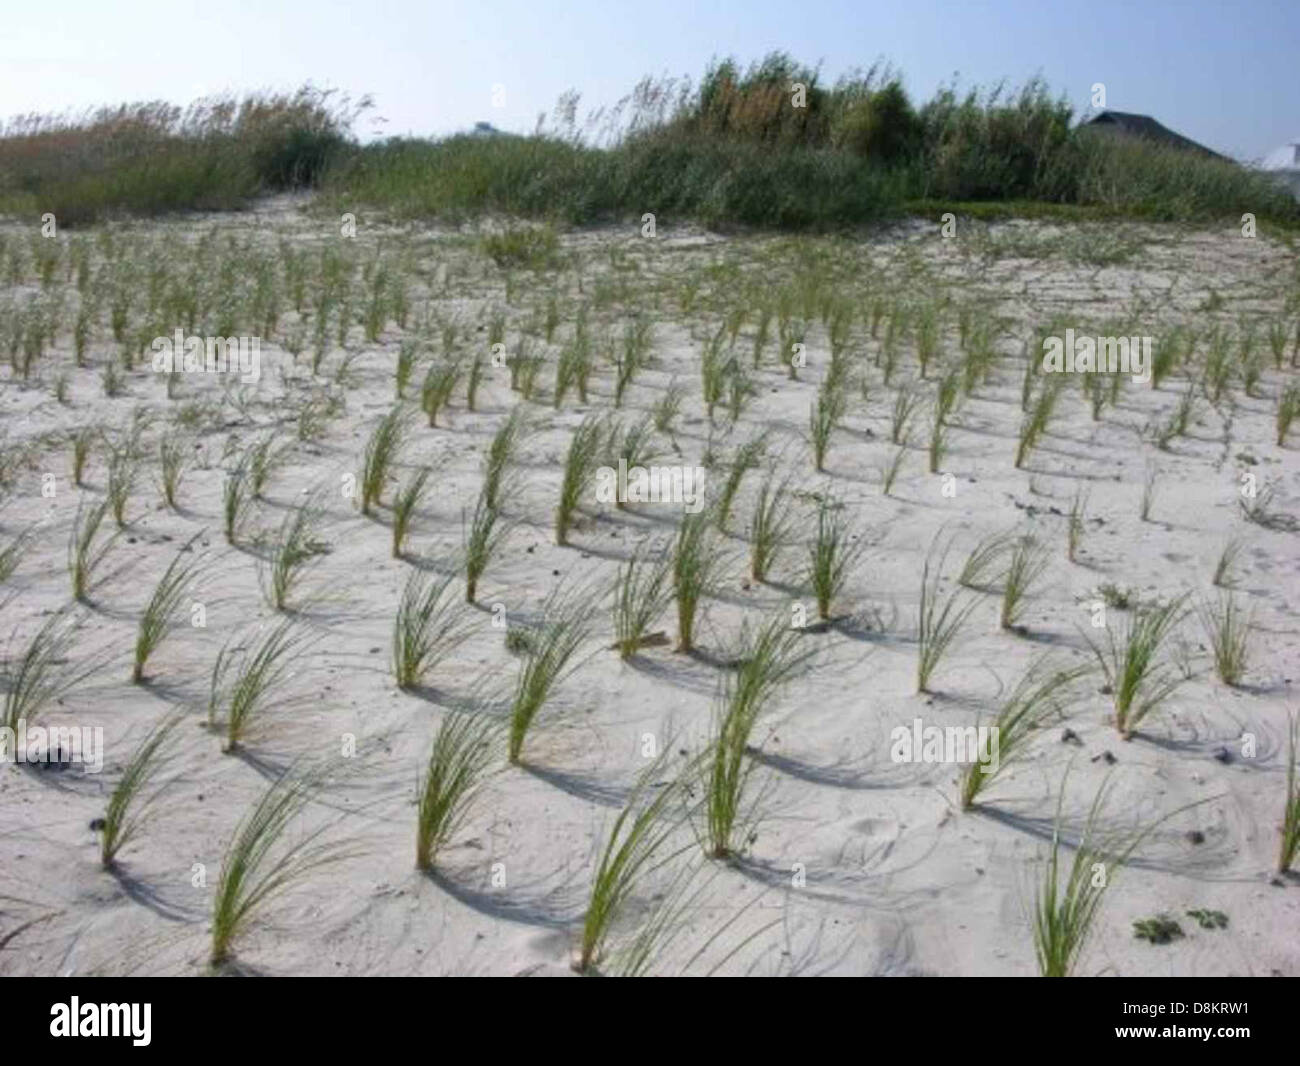 Spartina grass planted in rows to help with beach erosion. Stock Photo